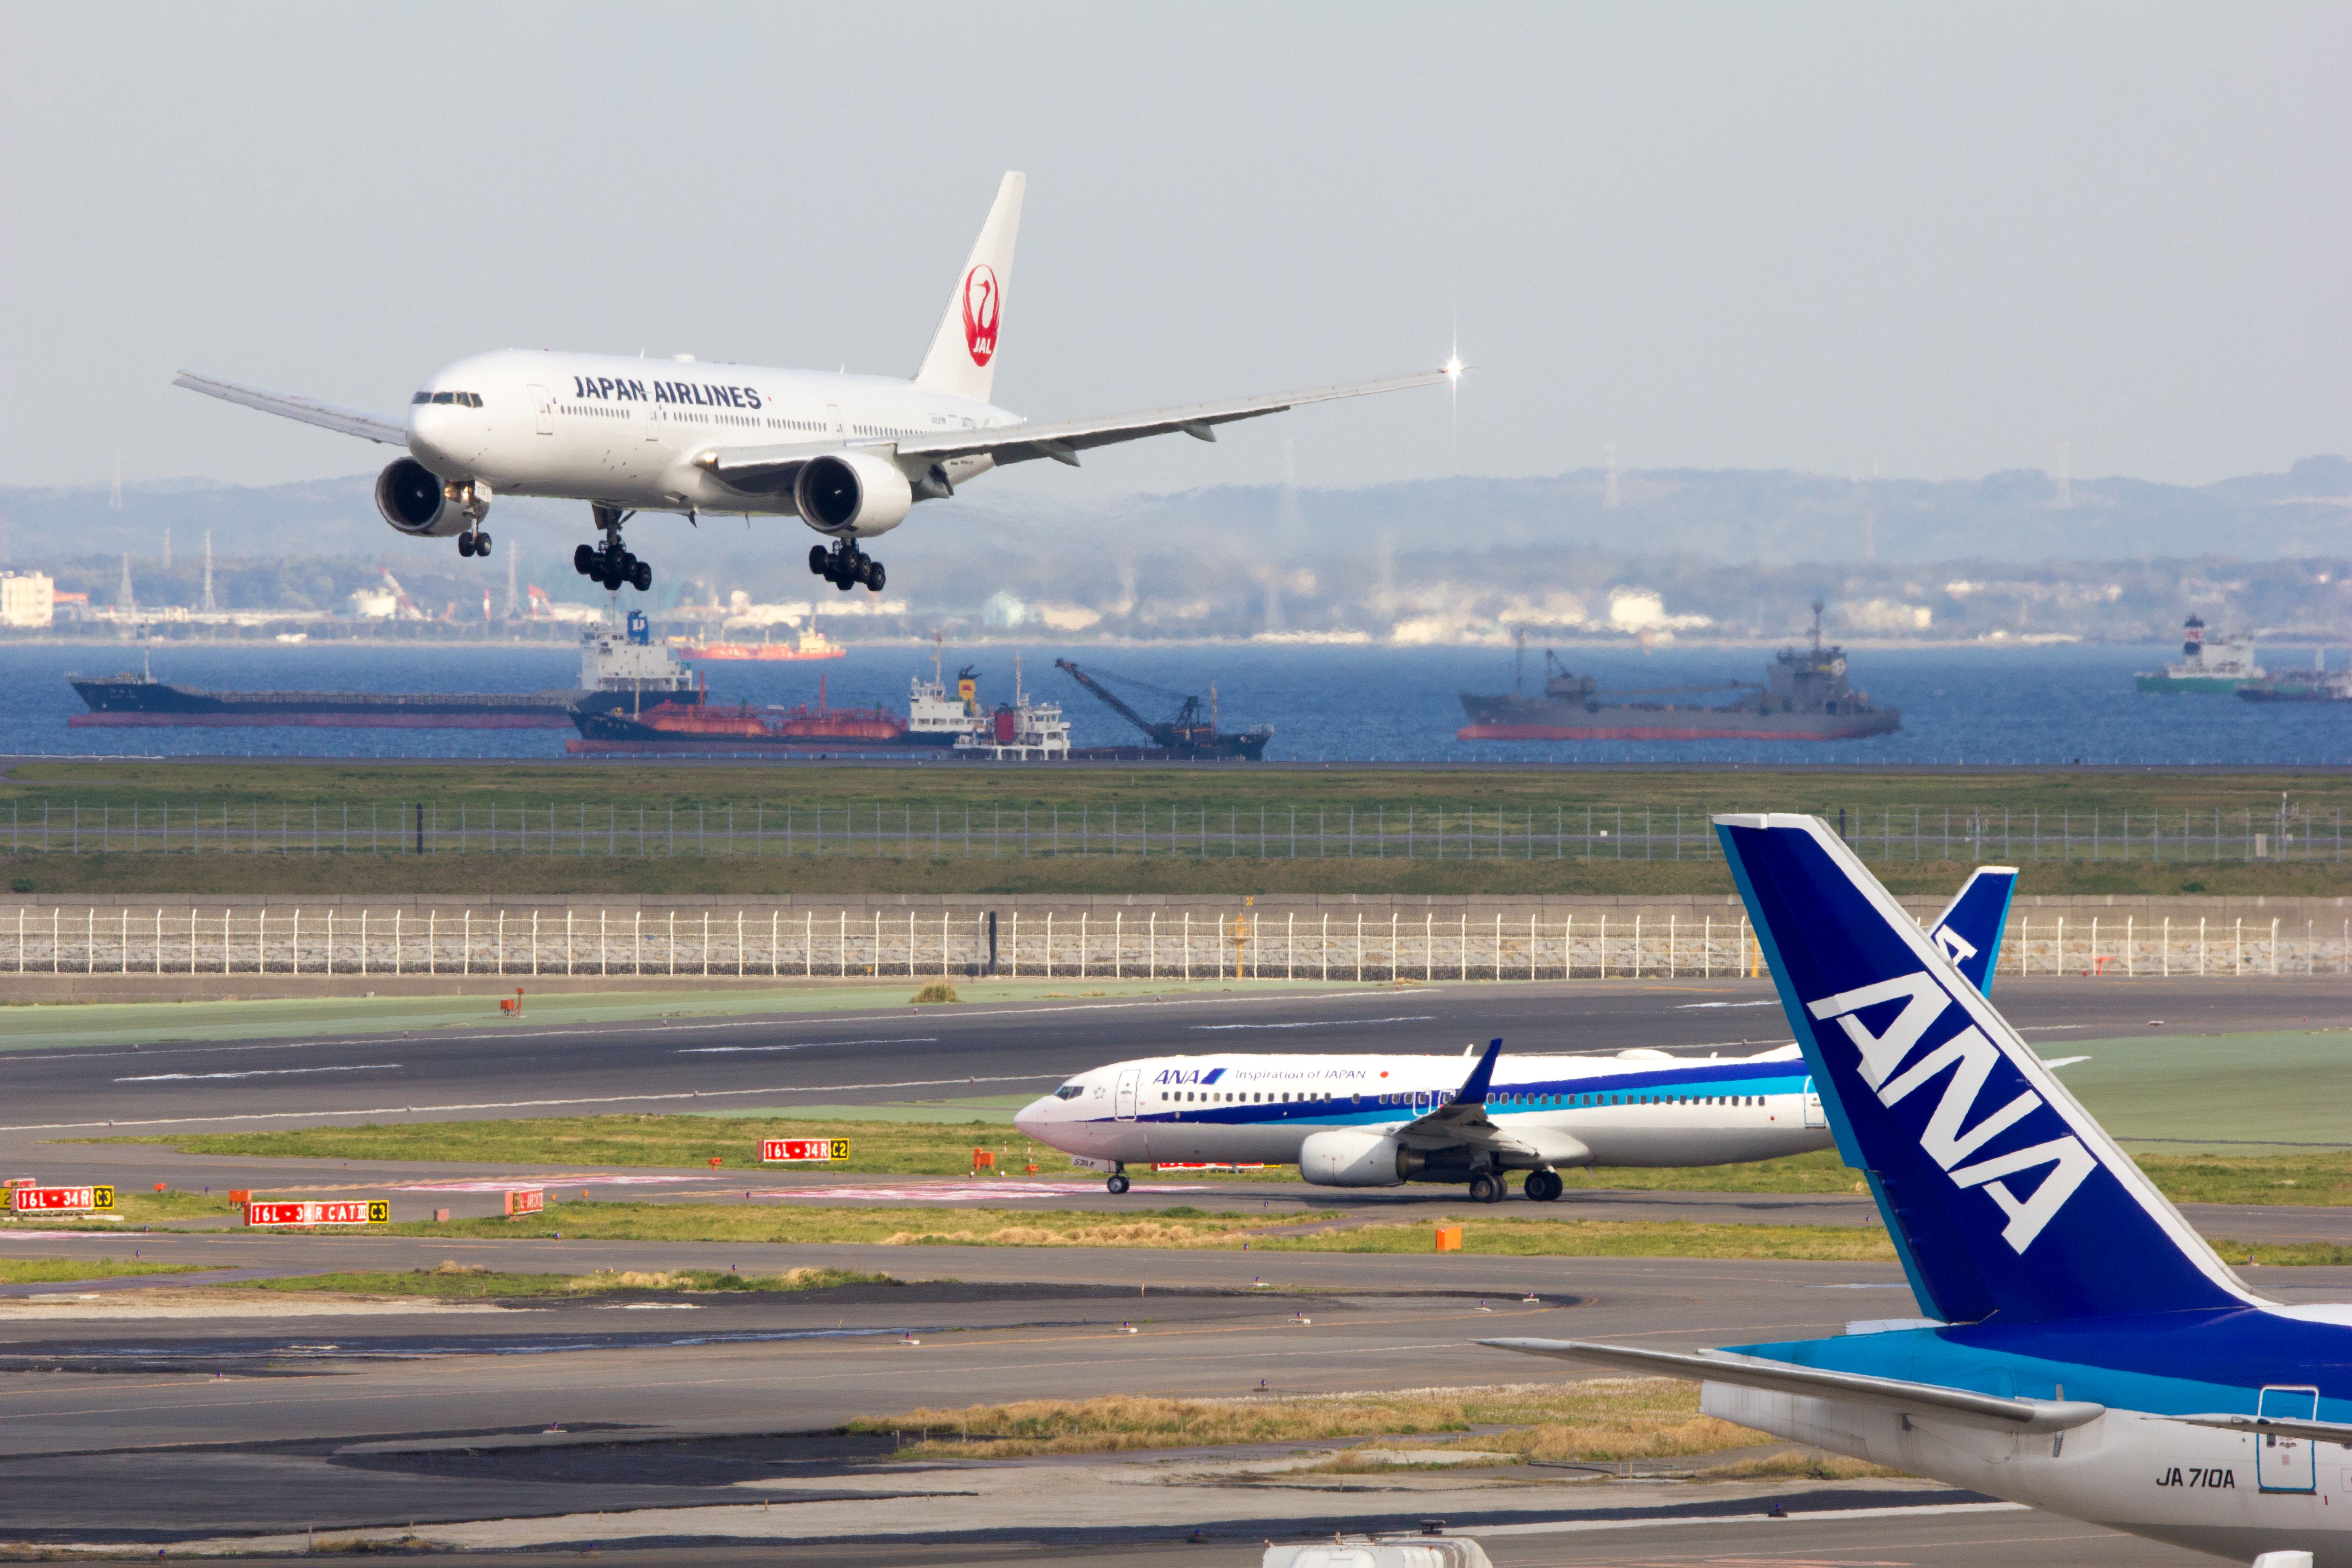 A Japan Airlines Boeing 777 about to land, as an ANA Boeing 737 waits on the taxiway.